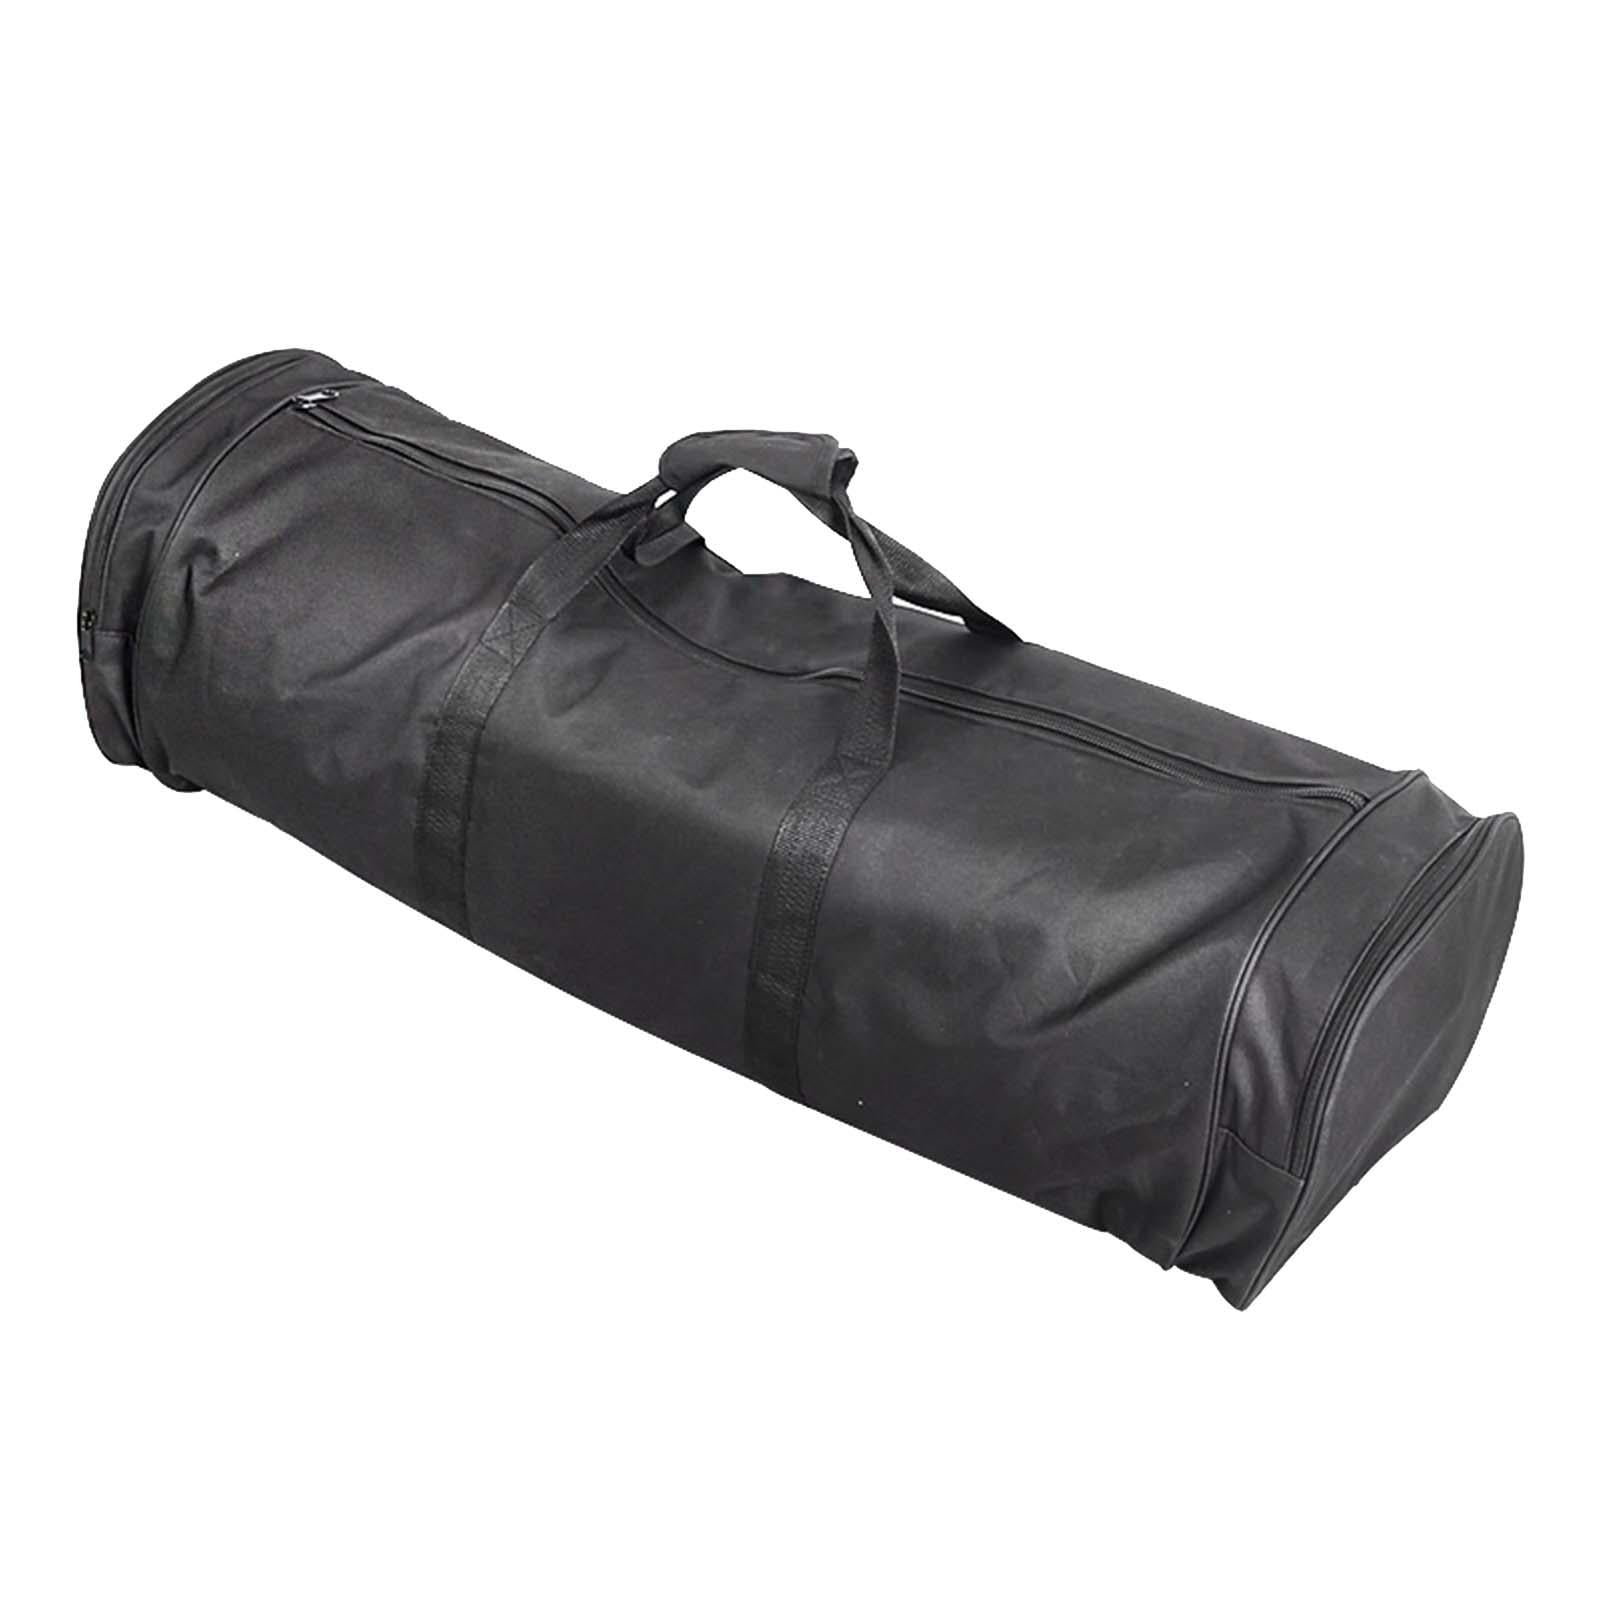 Tripod Carrying Case Bag Heavy Duty for 150EQ Telescope Accessories Eyepiece